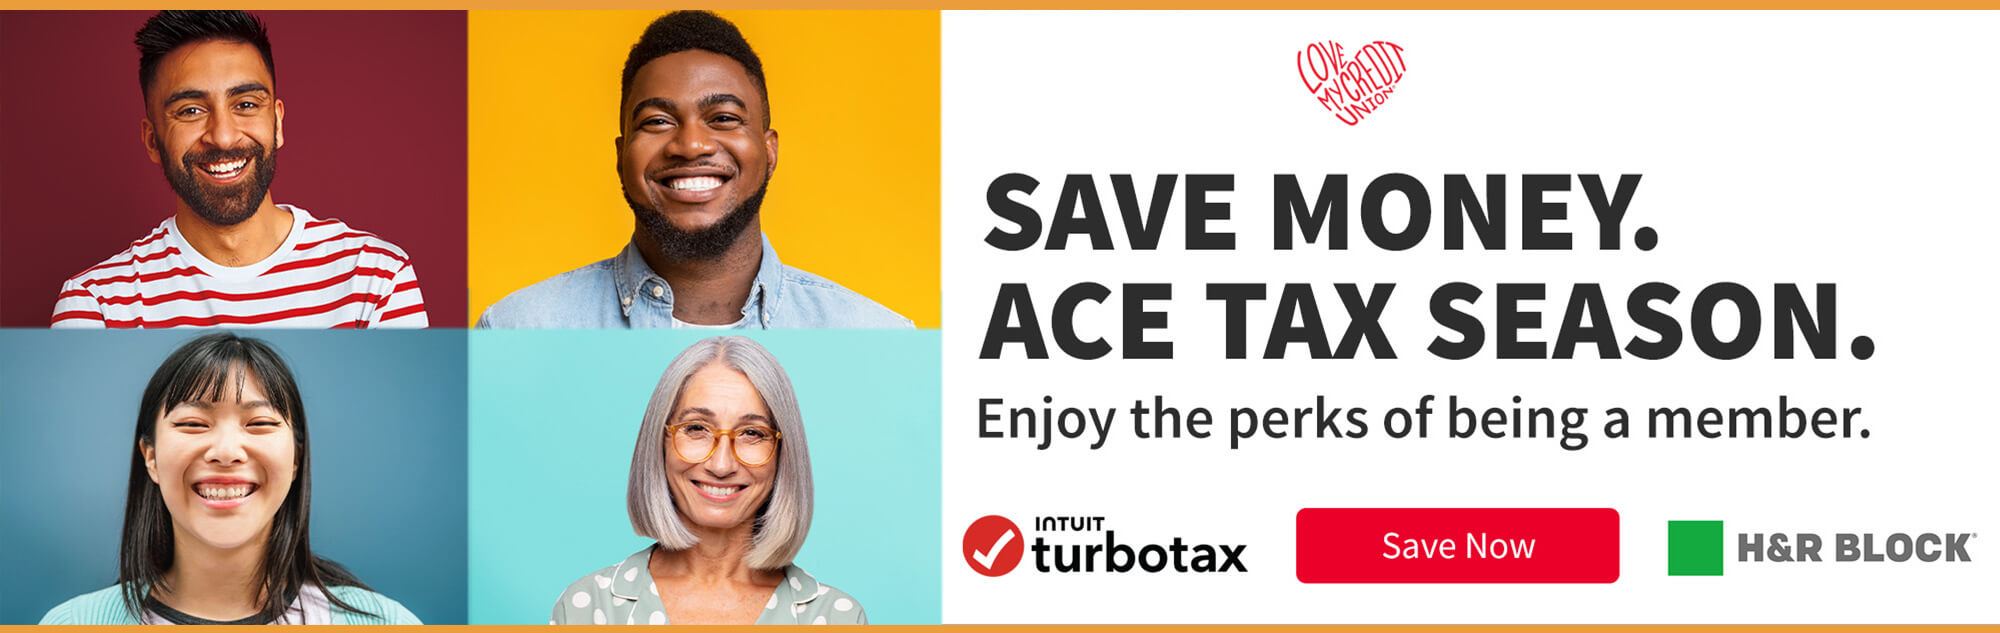 Save Money. Ace Tax Season. Enjoy the perks of being a member. Save Now.